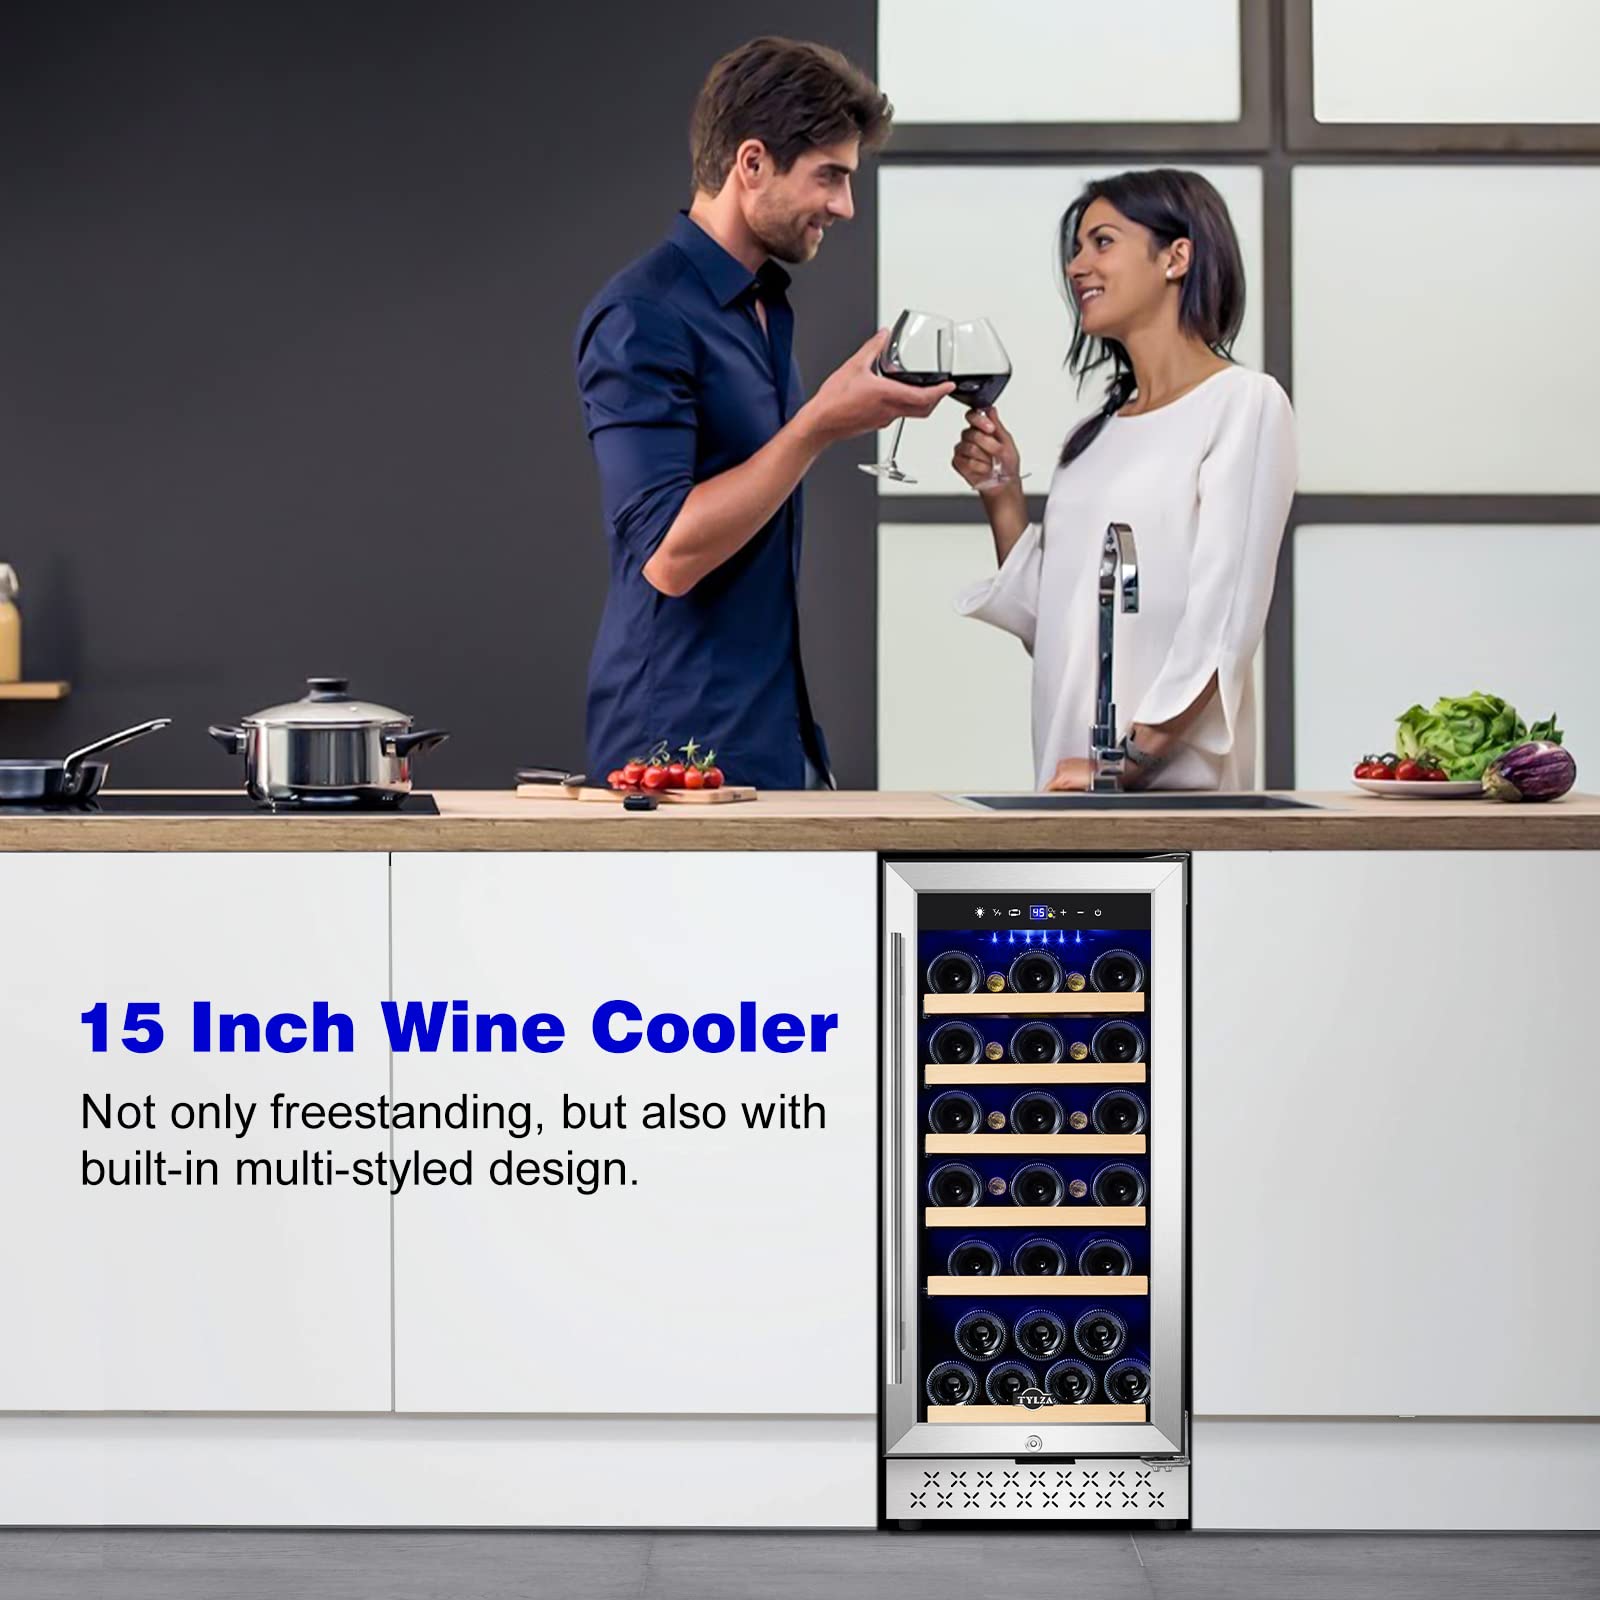 Tylza 15 Inch Wine Cooler Under Counter, 30 Bottle Built-in Wine Fridge with Stainless Steel Tempered Glass Door, Temp Memory Function, Freestanding Fast Cooling Wine refrigerator, Quiet Operation